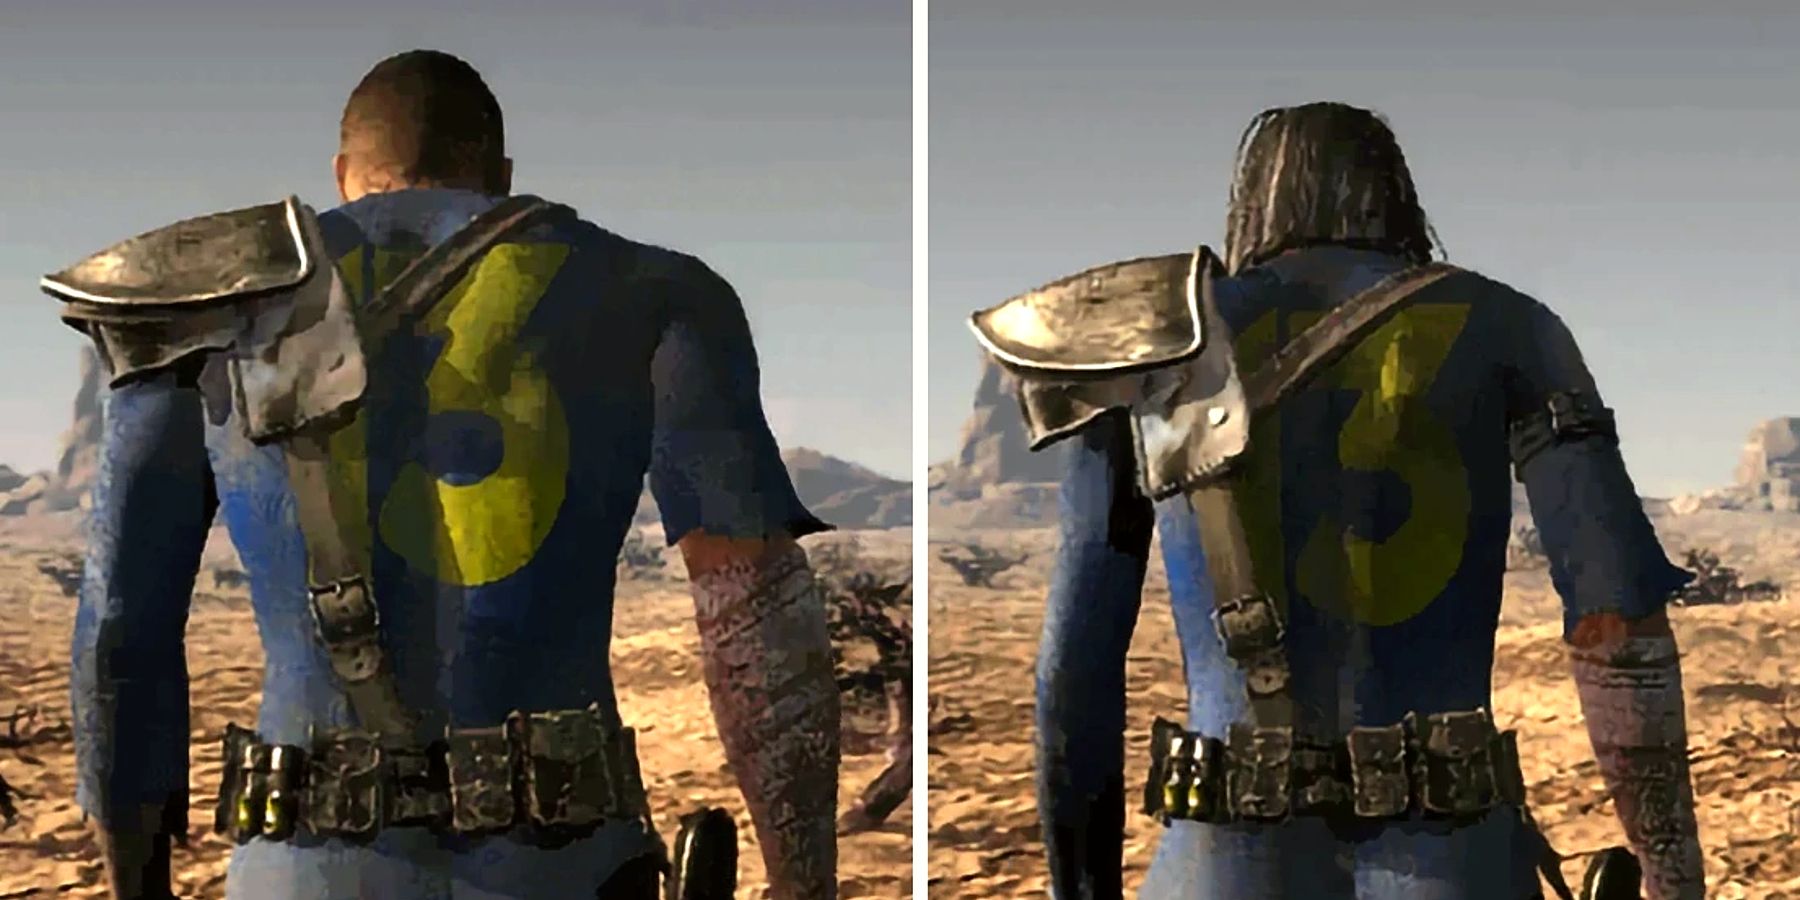 the-original-fallout-game-has-the-most-depressing-ending